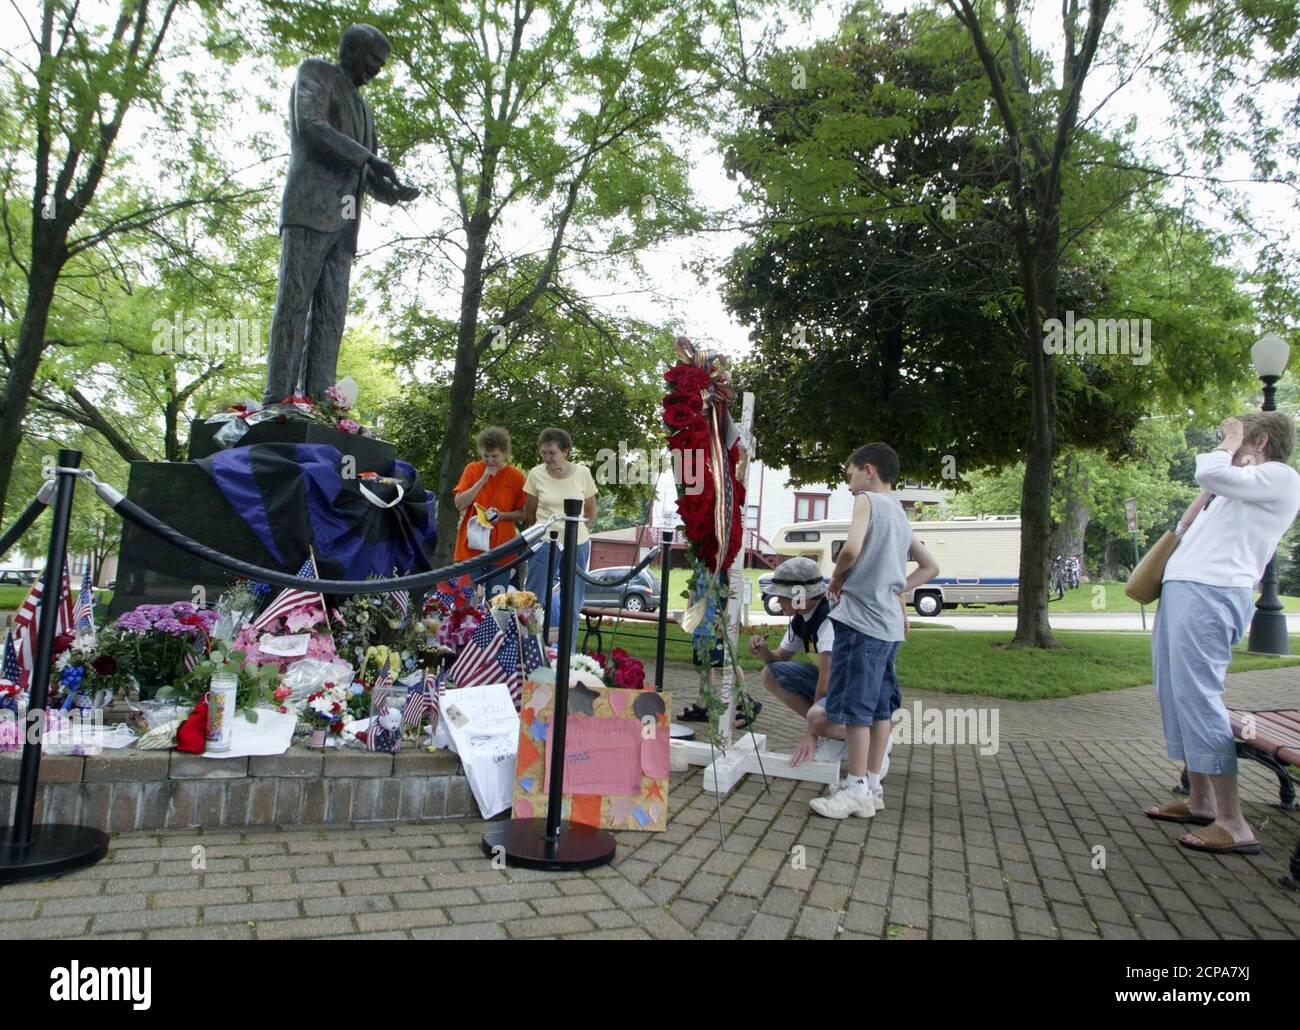 Mourners suvey a memorial to U.S. President Reagan at his boyhood home in Dixon, Illinois, June 7, 2004. Reagan died at his Los Angeles home June 5 at the age of 93 and had left wishes that regular Americans would be able to pay tribute to him. REUTERS/John Gress  JG Stock Photo